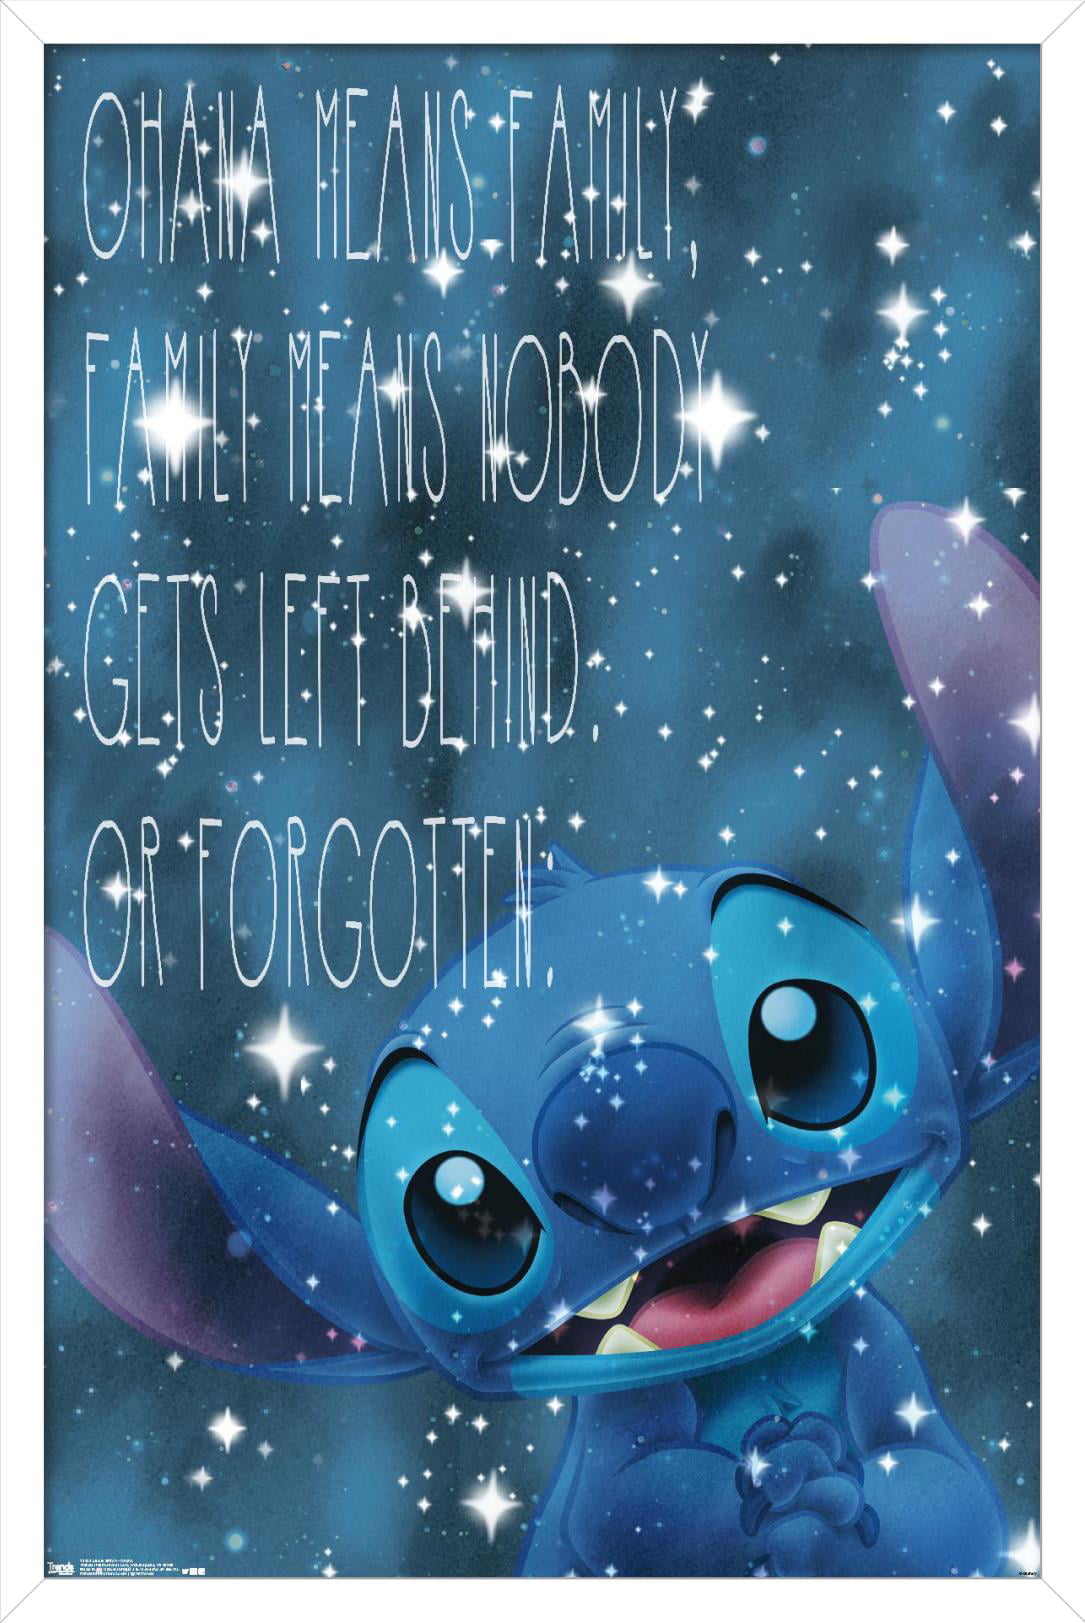 CAN o & Stitch Canvas Painting, Disney Anime, Cute Stitch Posters